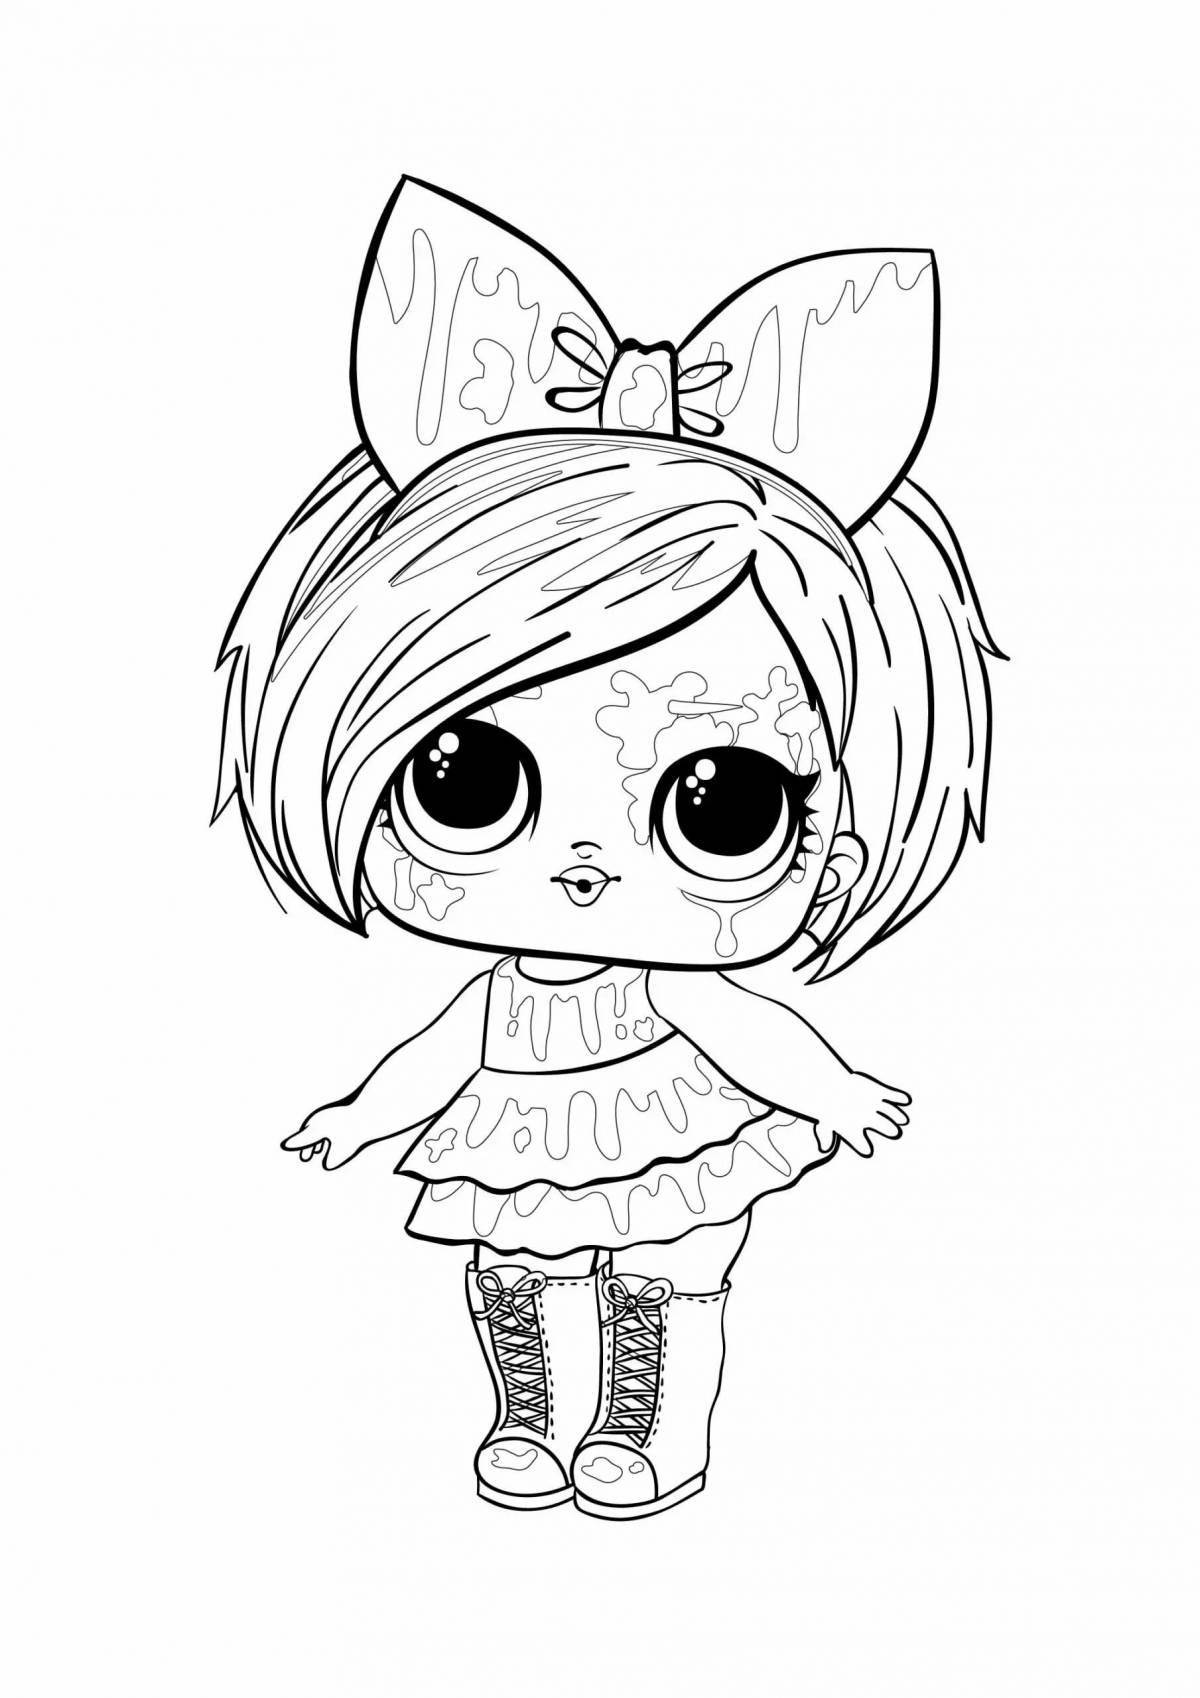 Low's funny doll coloring book for kids